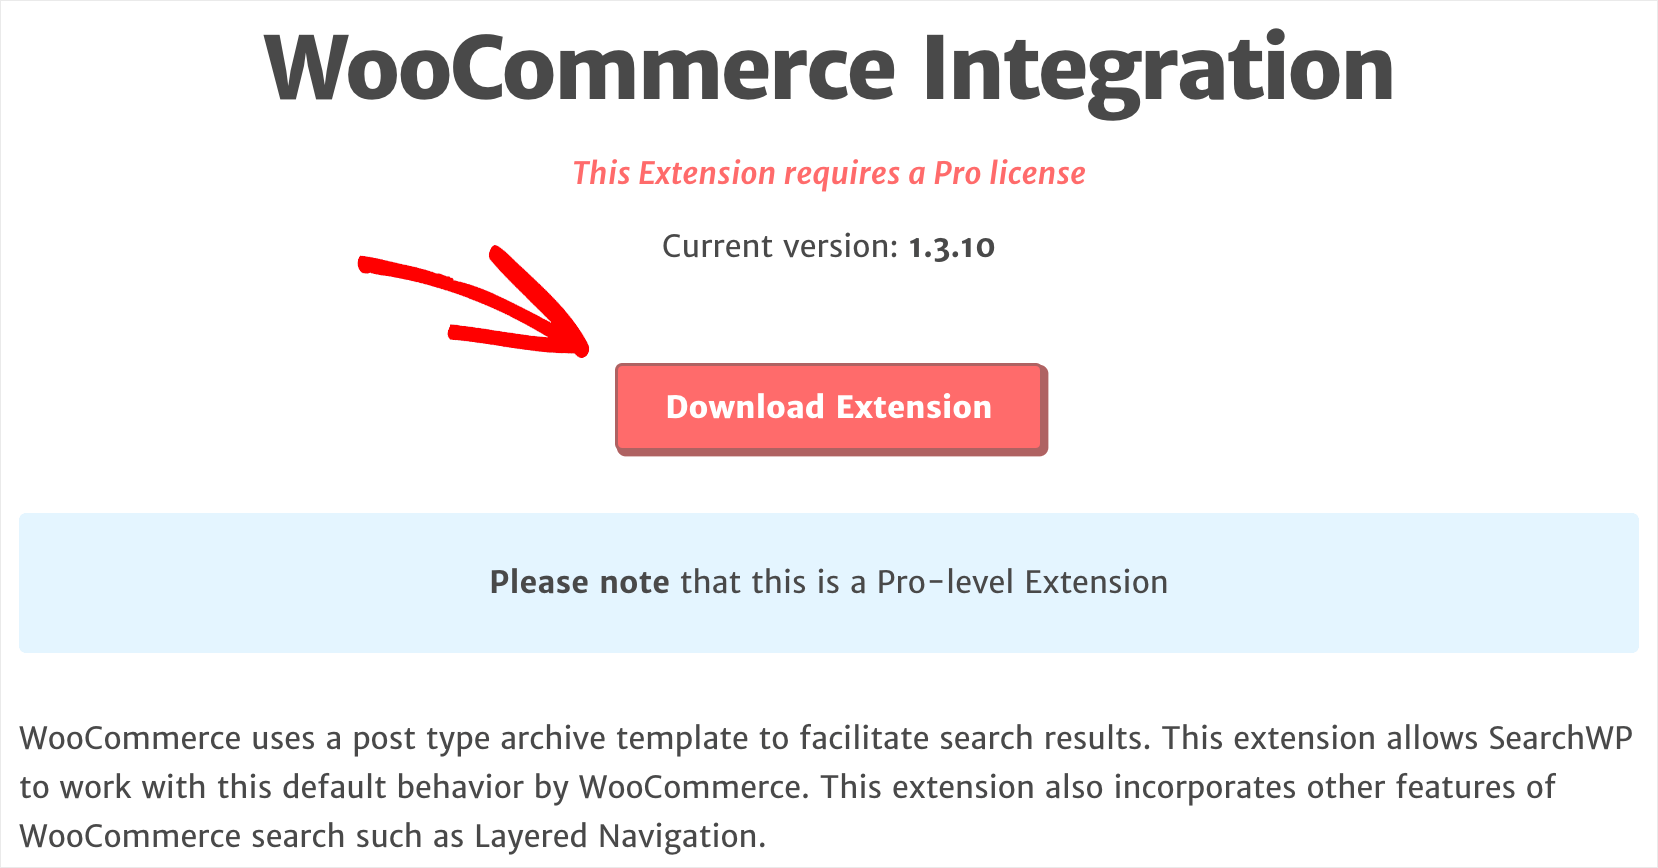 download the WooCommerce integration extension